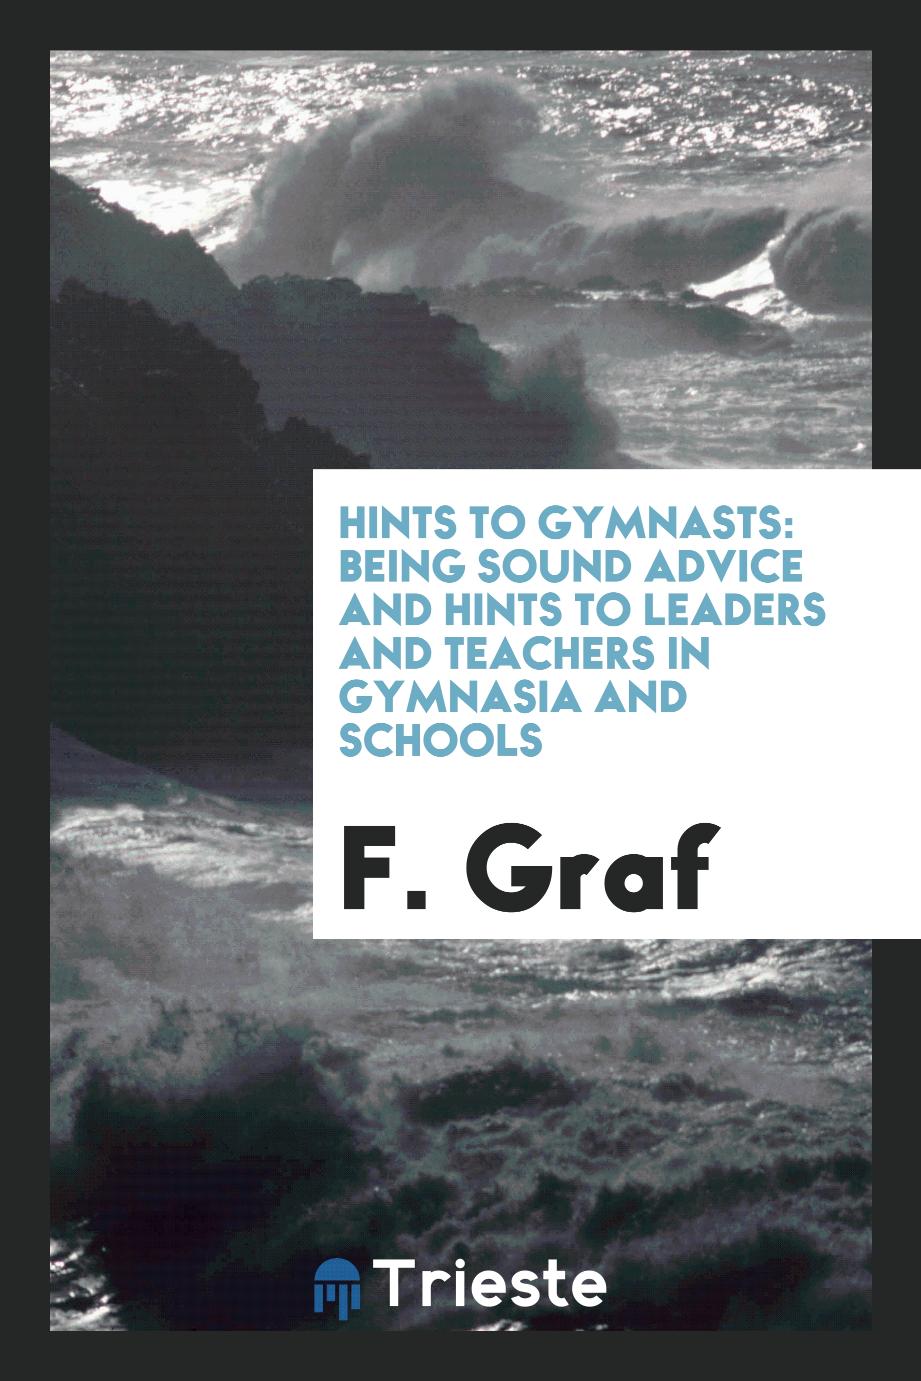 Hints to gymnasts: being sound advice and hints to leaders and teachers in gymnasia and schools